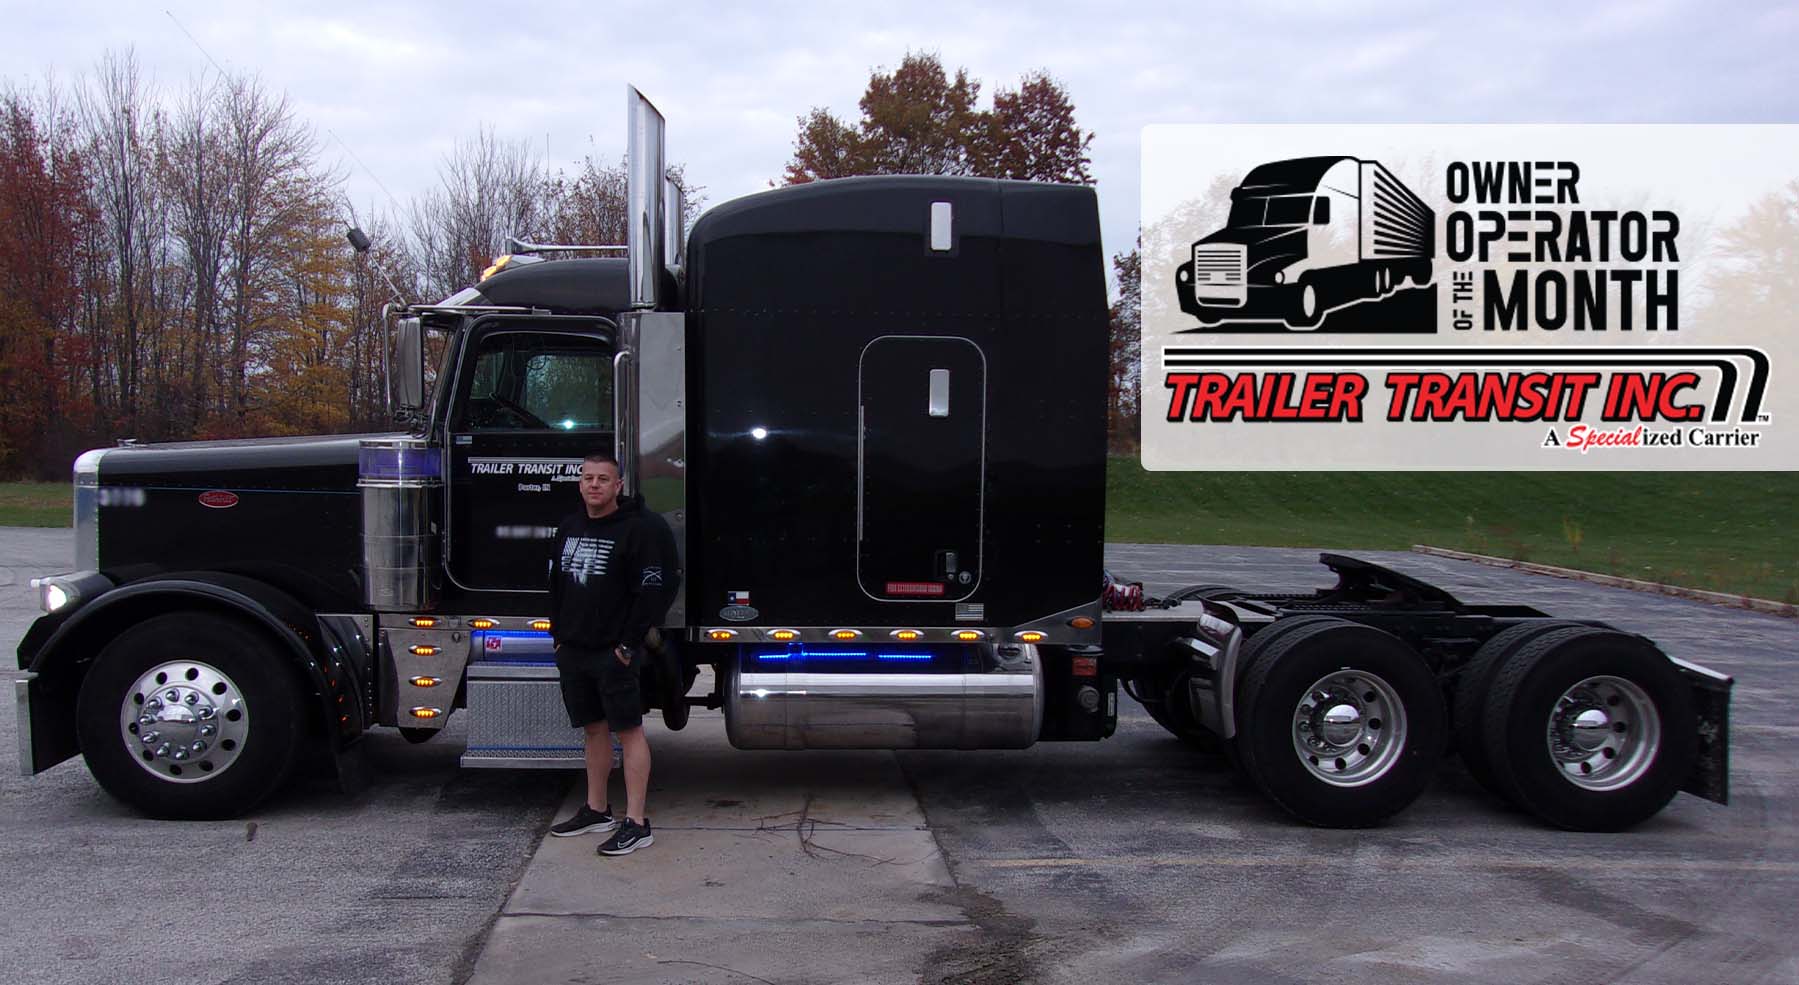 Trailer Transit Inc. | February 2022 Owner Operator of the Month standing in front of a black semi truck.